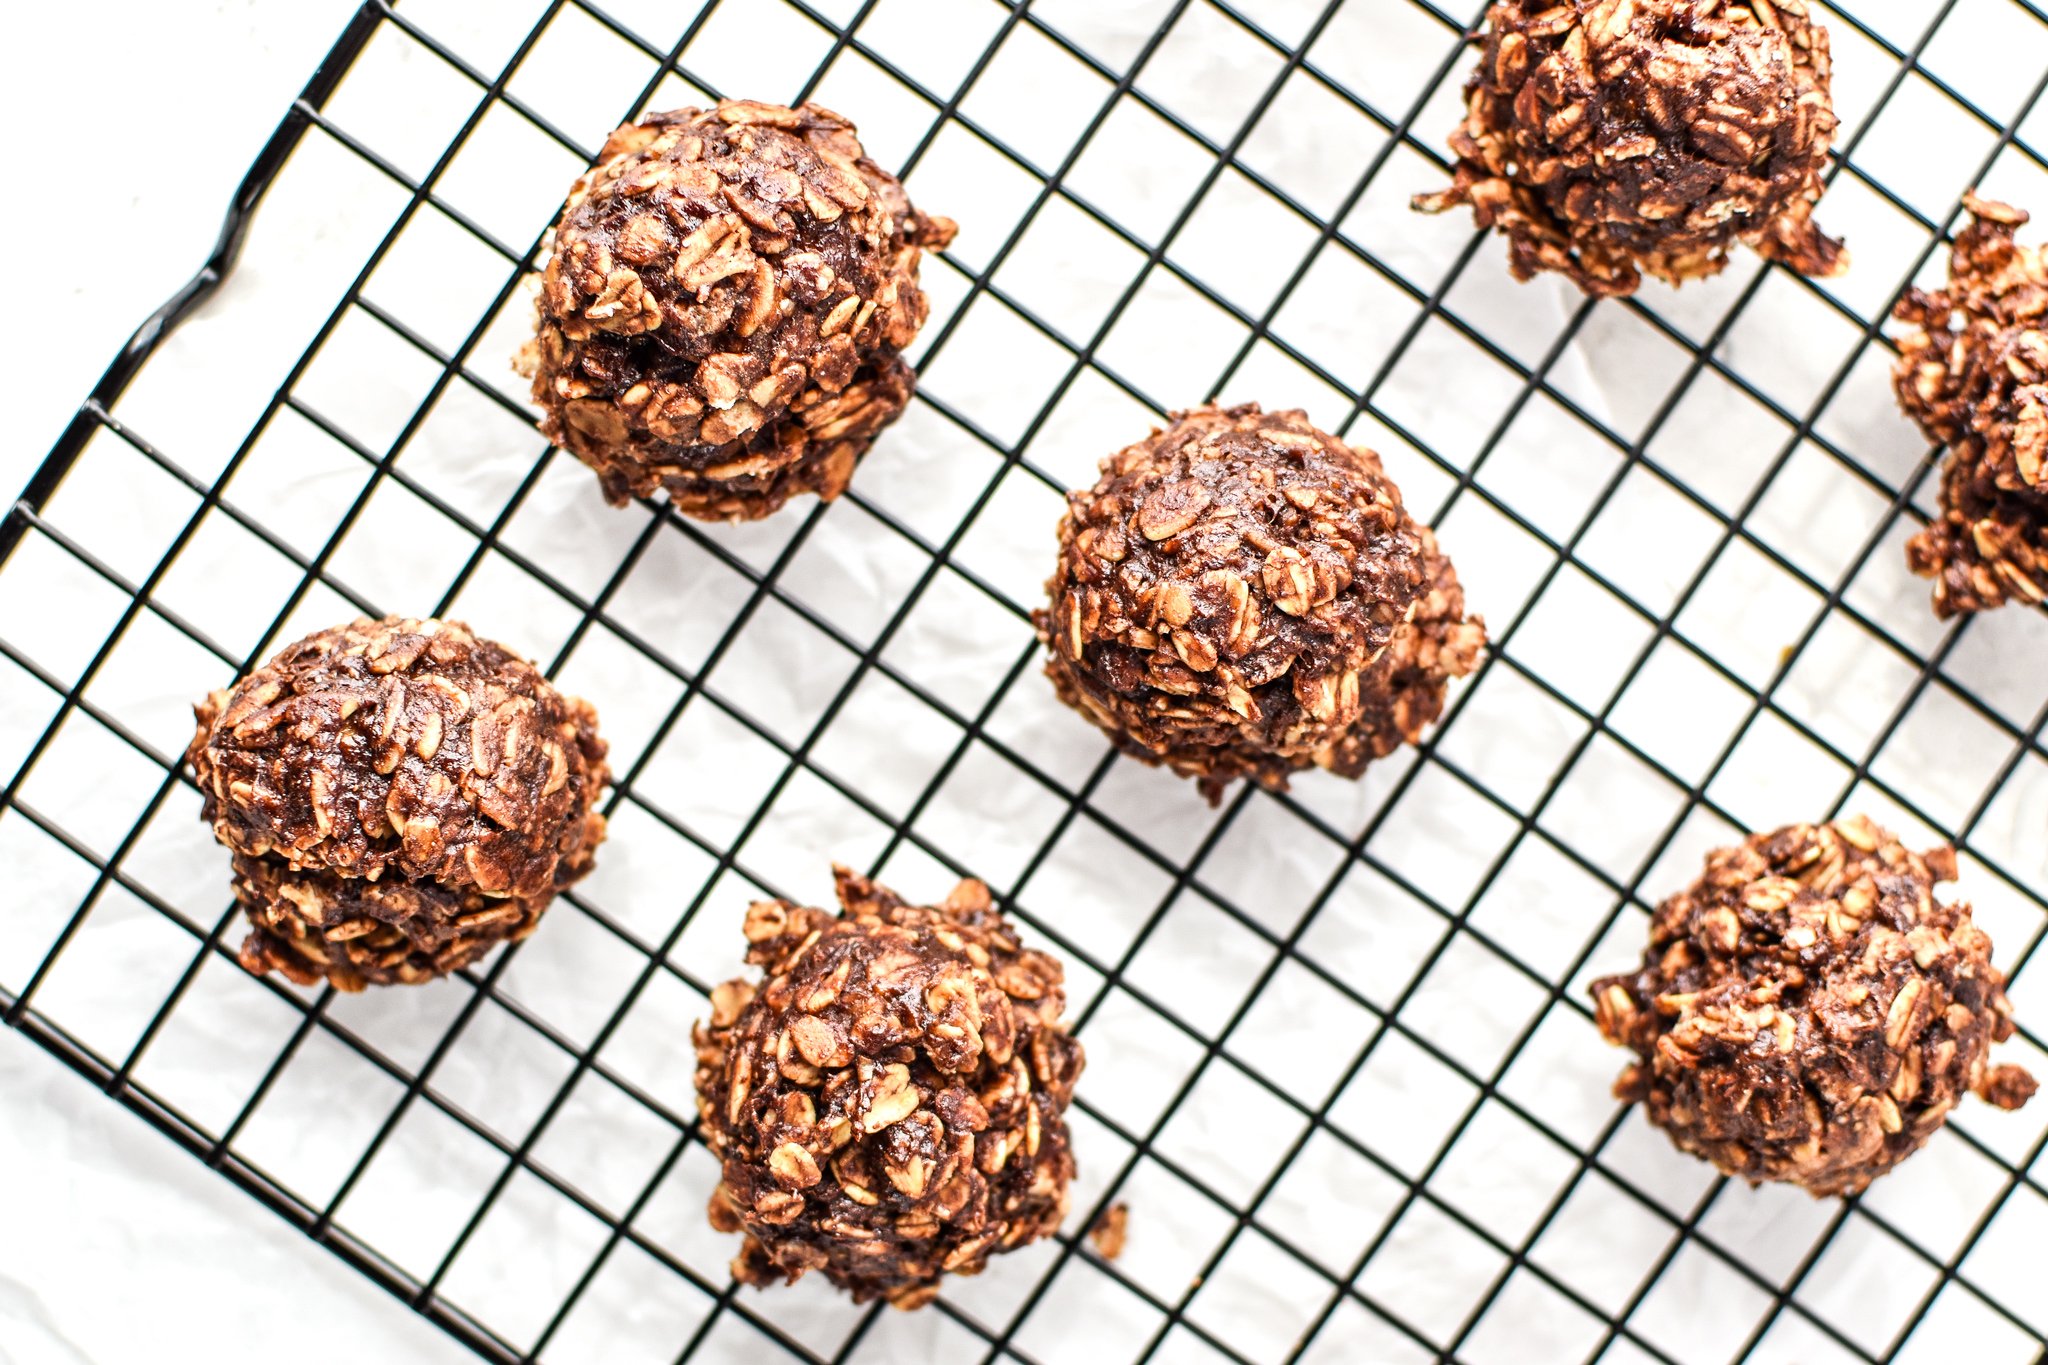 Banana Chocolate Oatmeal Cookie Mounds just baked and cooling on a cooling rack.